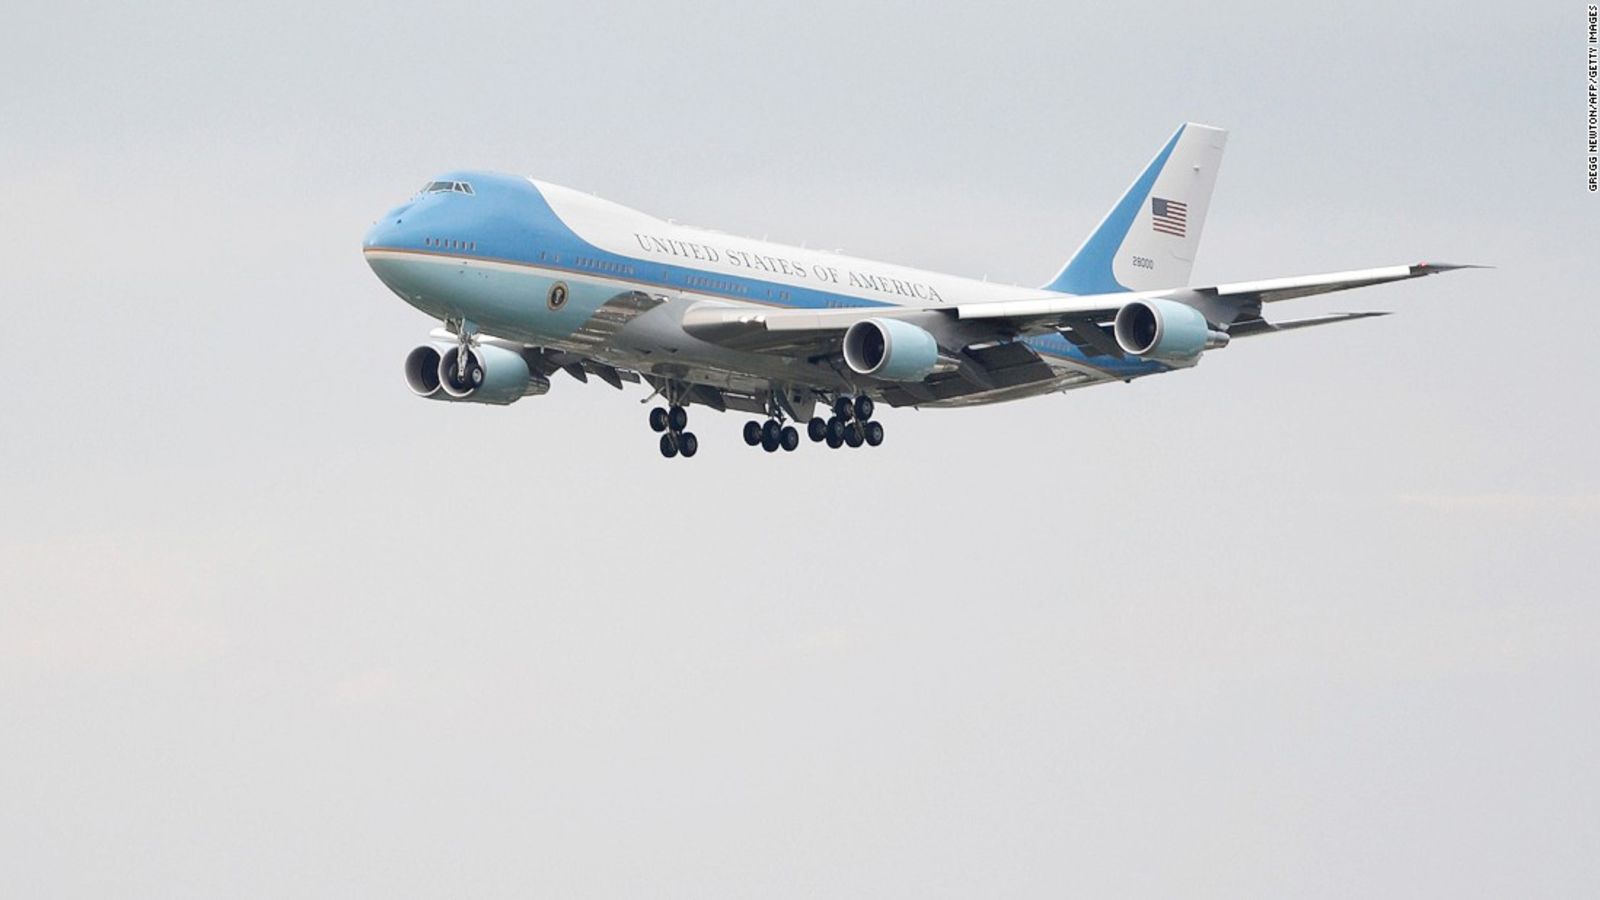 Illustration for article titled News: Air Force One possibly getting a redesign under Trump